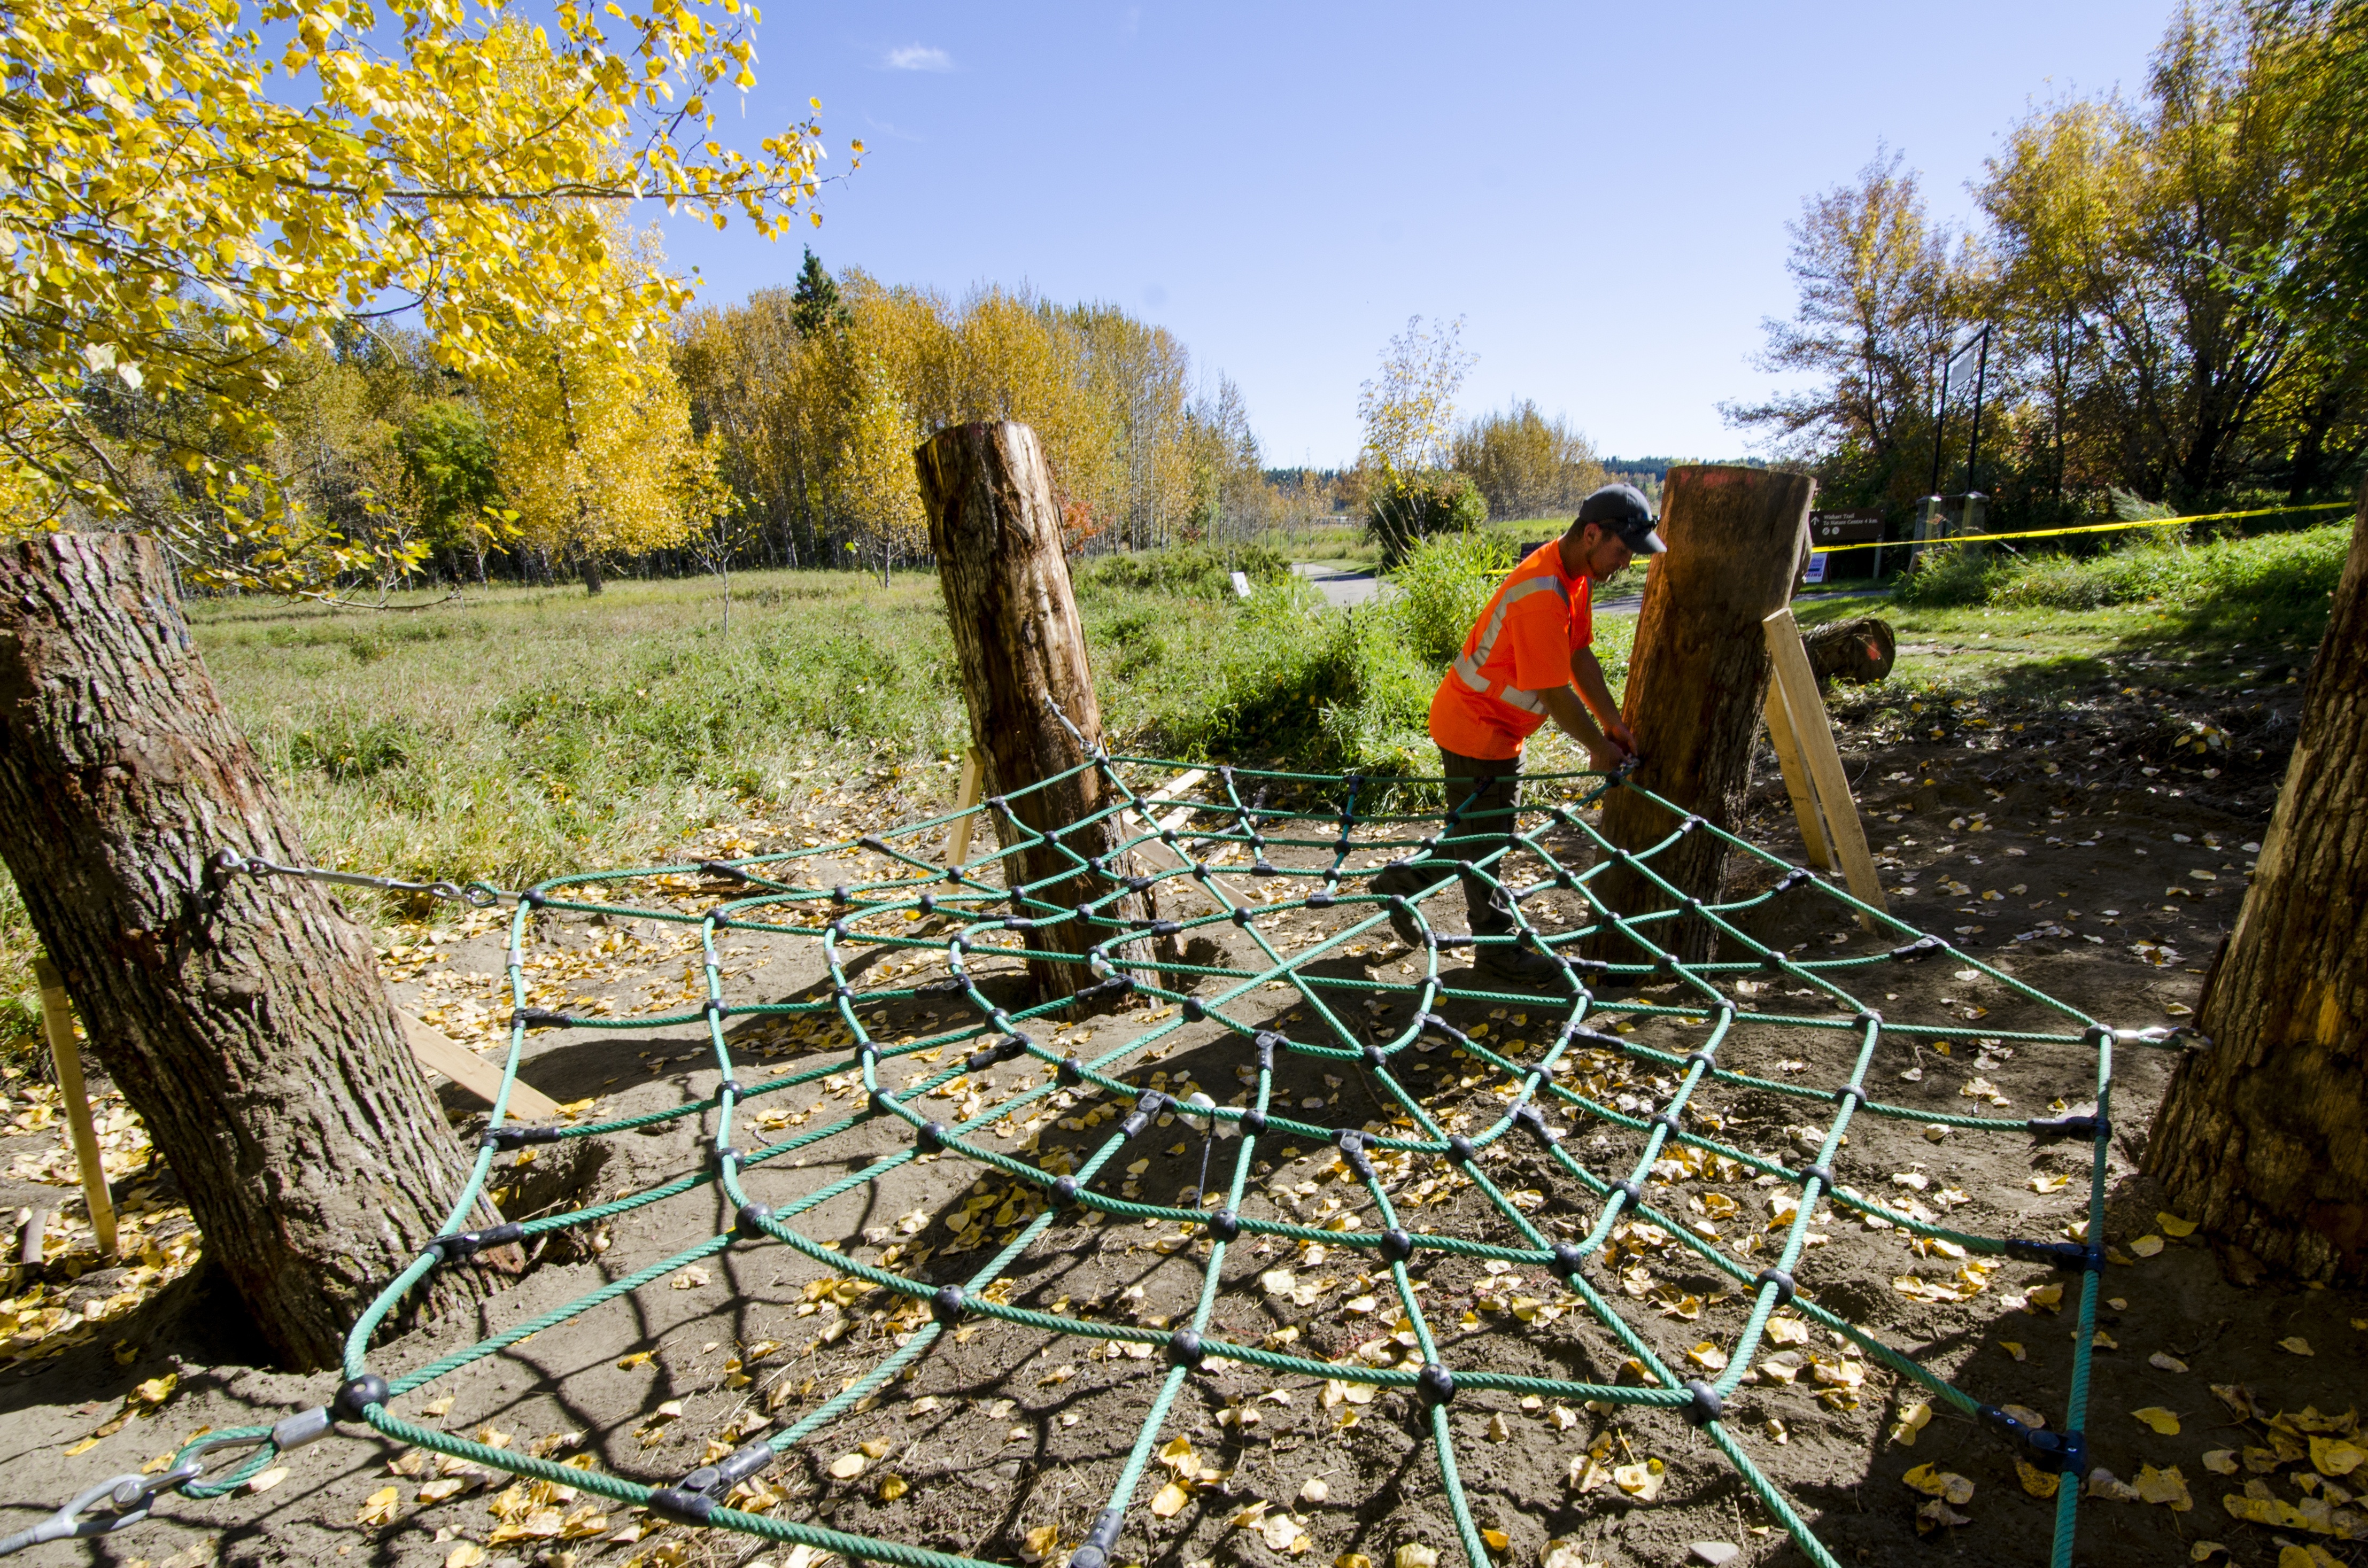 PLAYFUL INSTALLATION – Jay Wood of Bienenstock Nature Playgrounds puts the finishing touches on the spider crawler